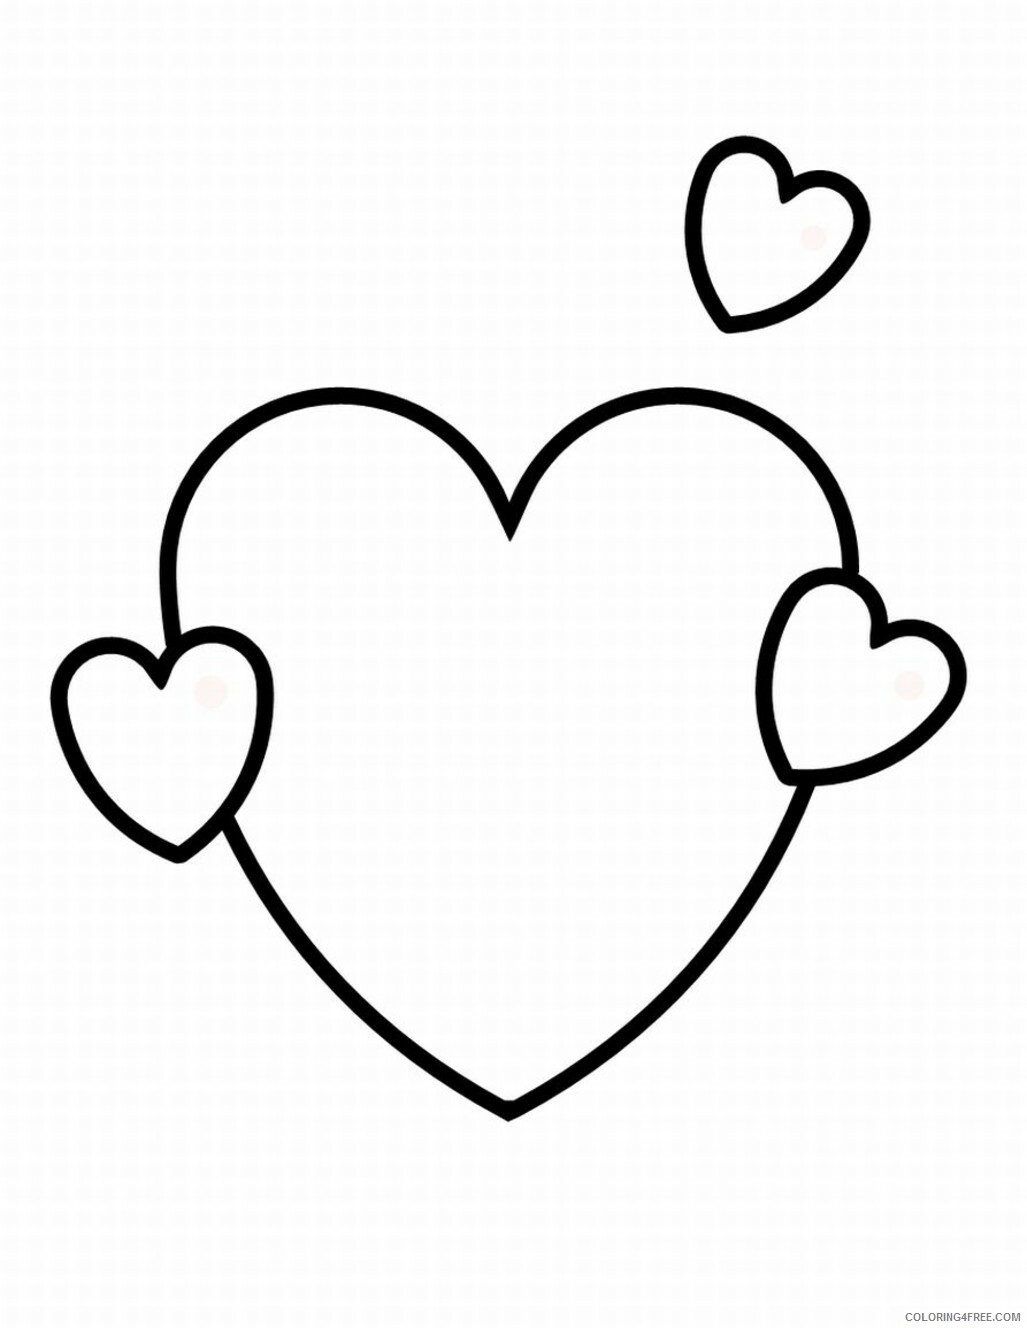 Valentine Heart Coloring Pages Valentine Hearts Printable 2021 6143 Coloring4free